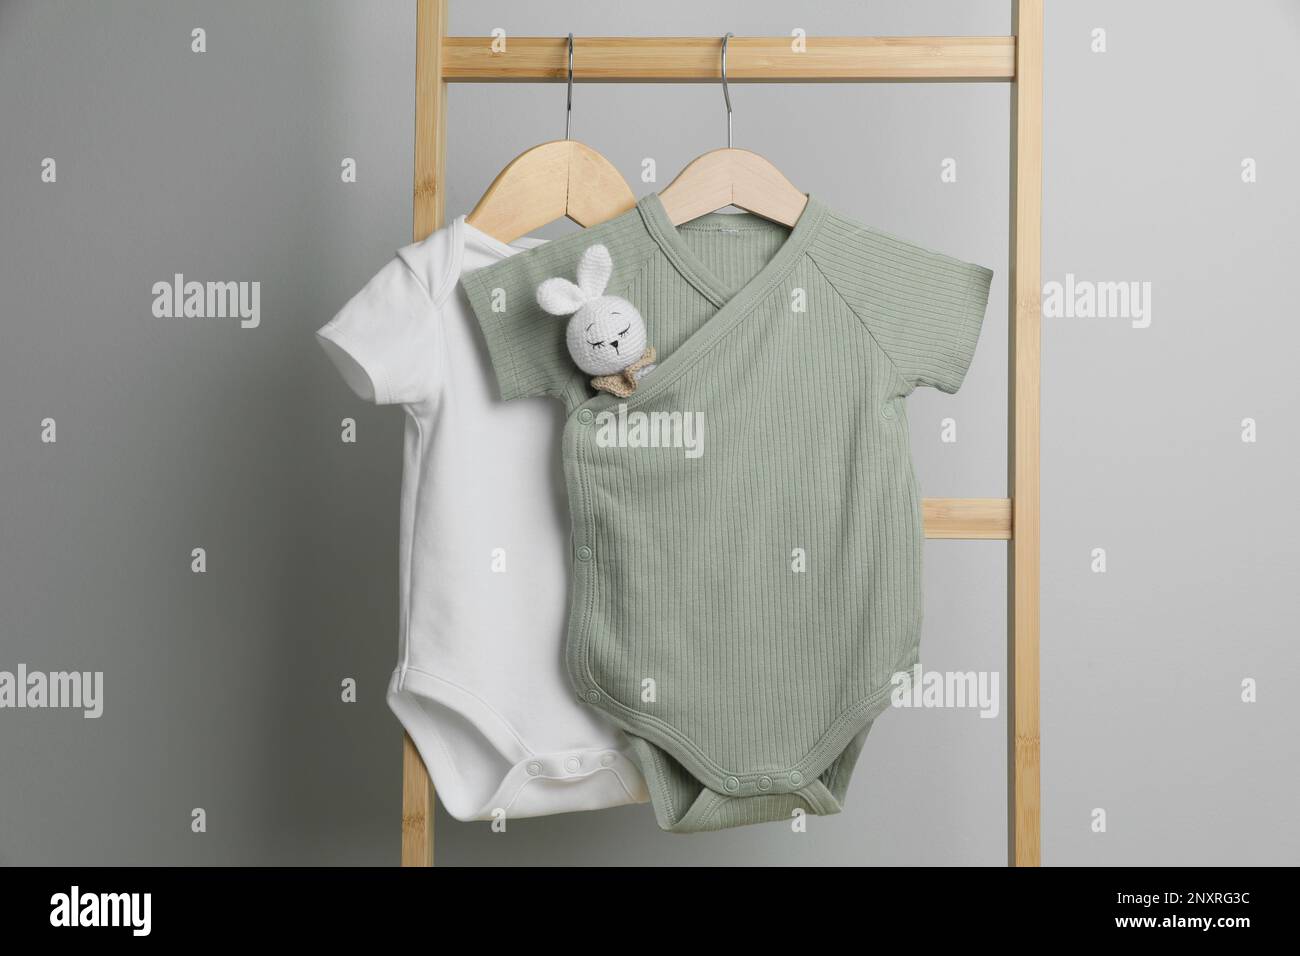 Baby bodysuits hanging on ladder near light wall Stock Photo